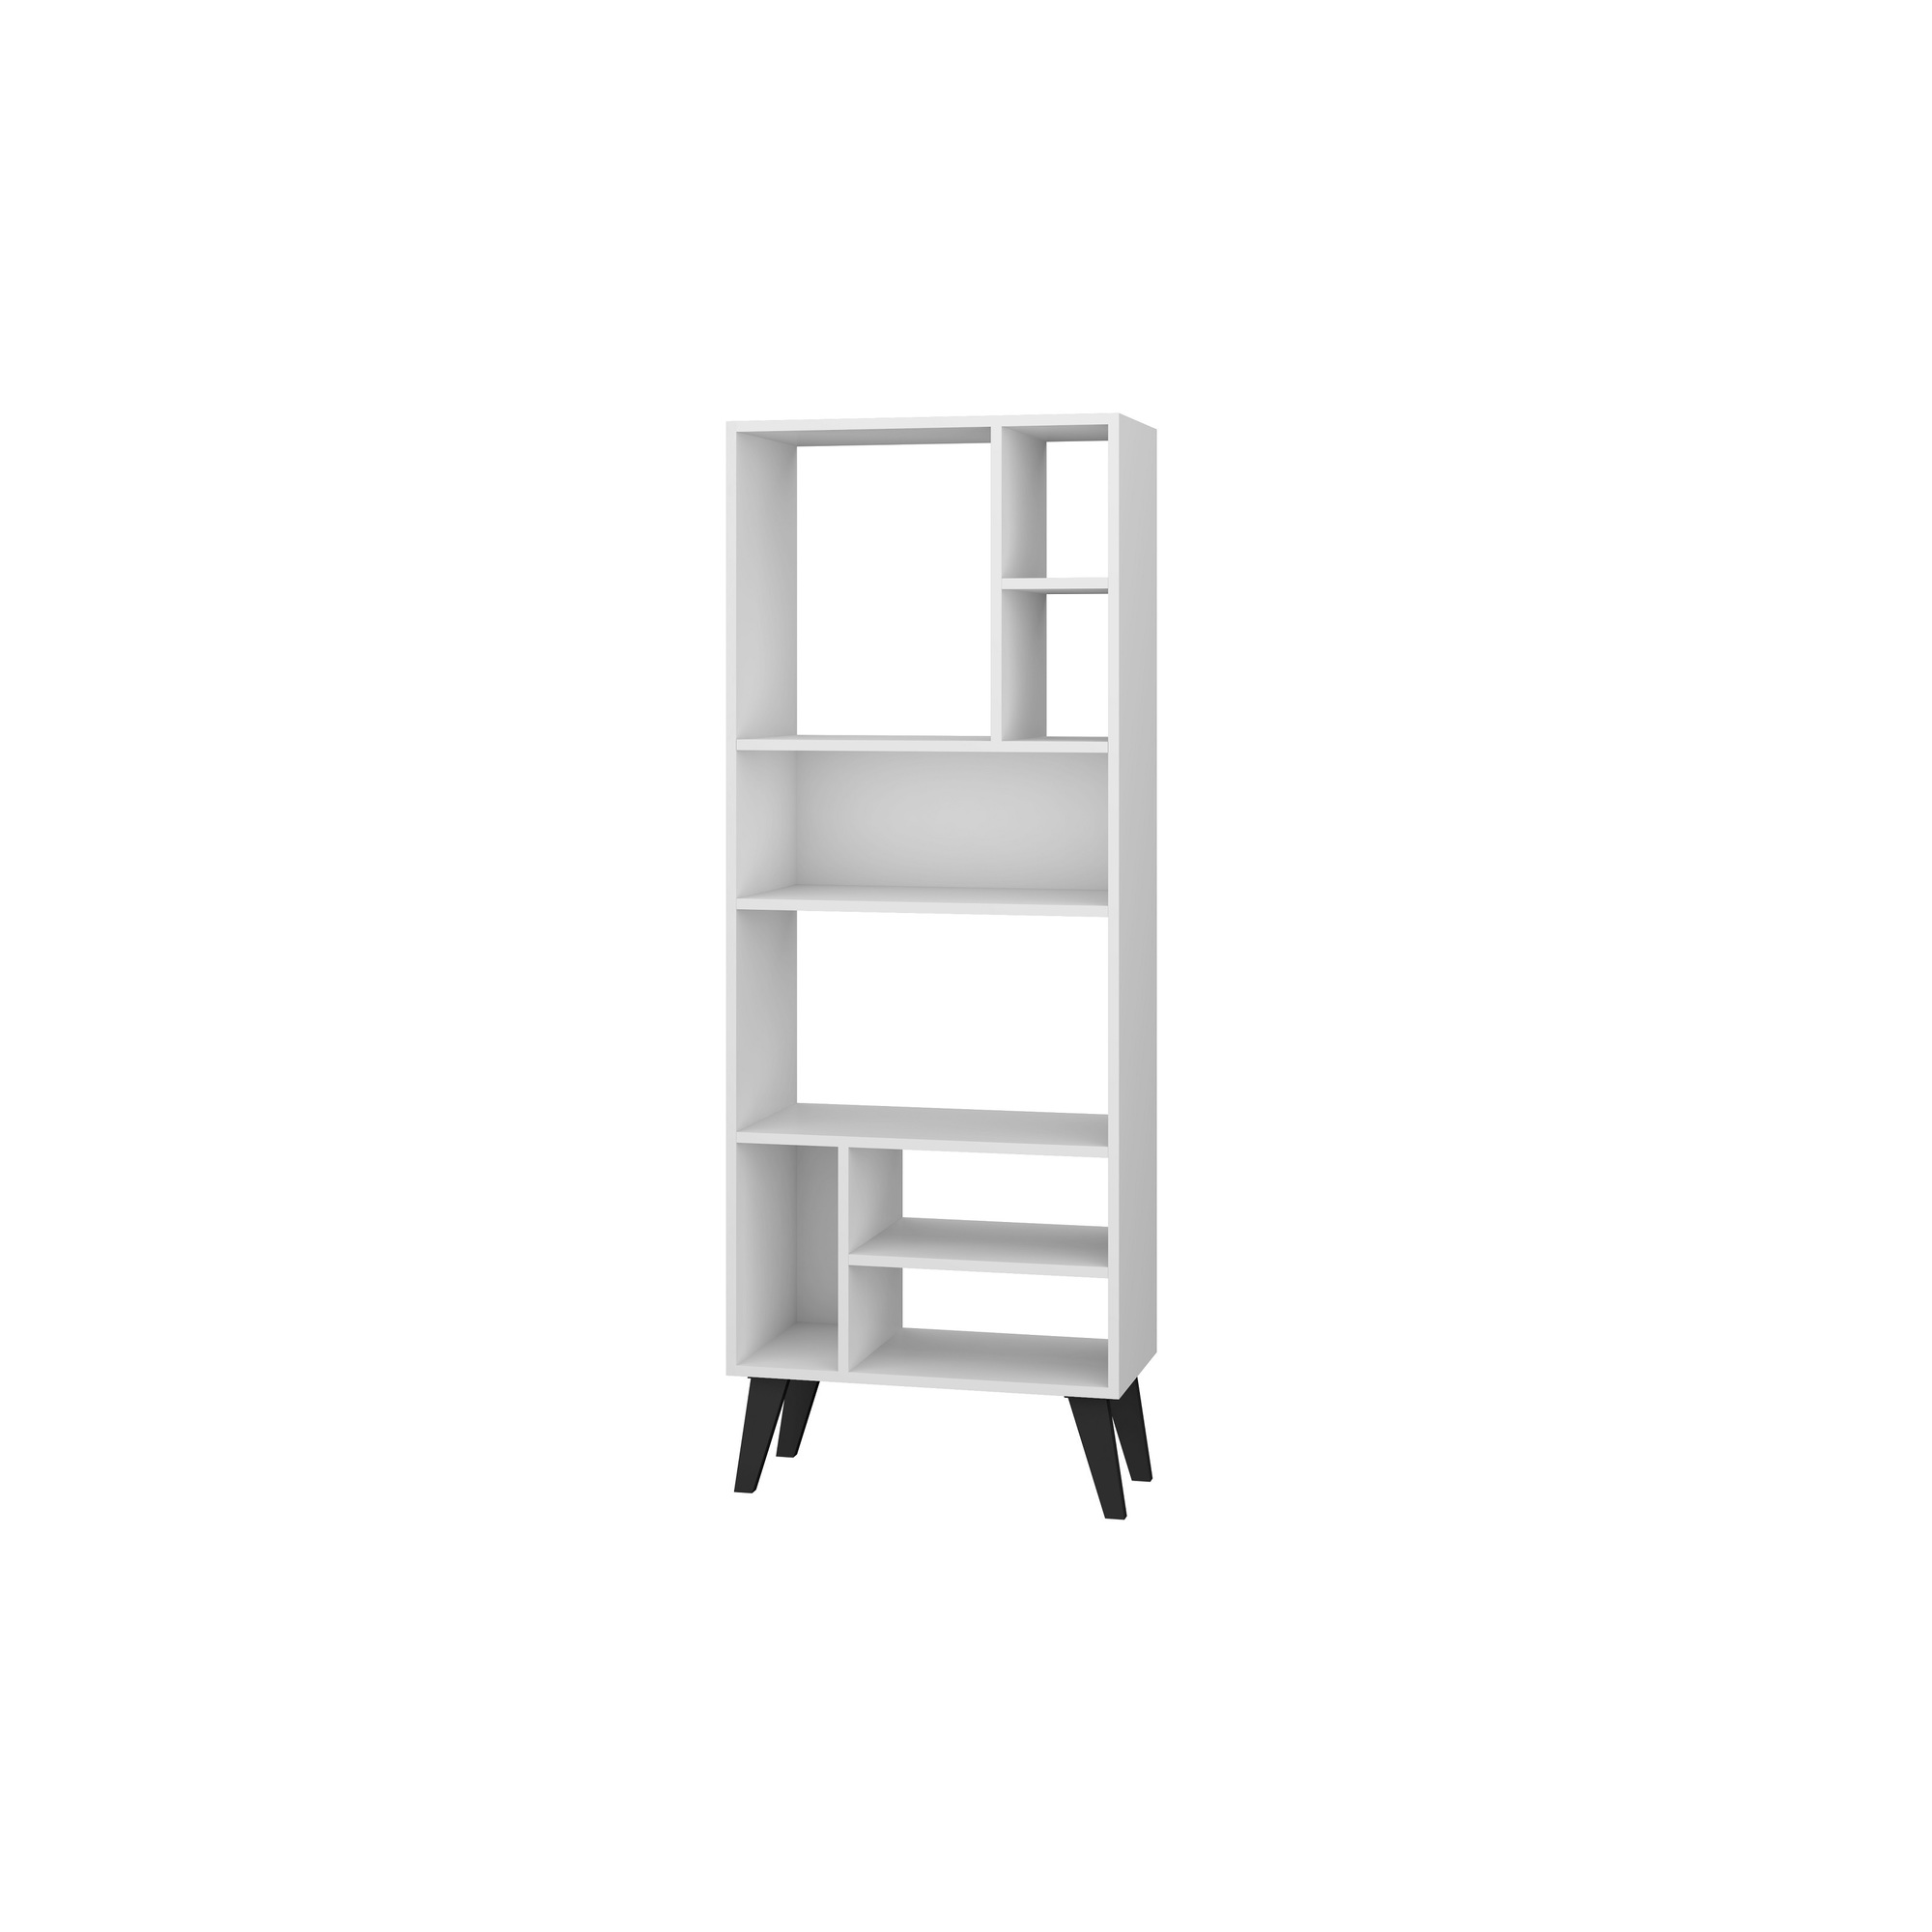 Manhattan Comfort, Warren Tall Bookcase 1.0 with 8 Shelves in White, Height 60.03 in, Shelves (qty.) 8 Material MDPE, Model 178AMC